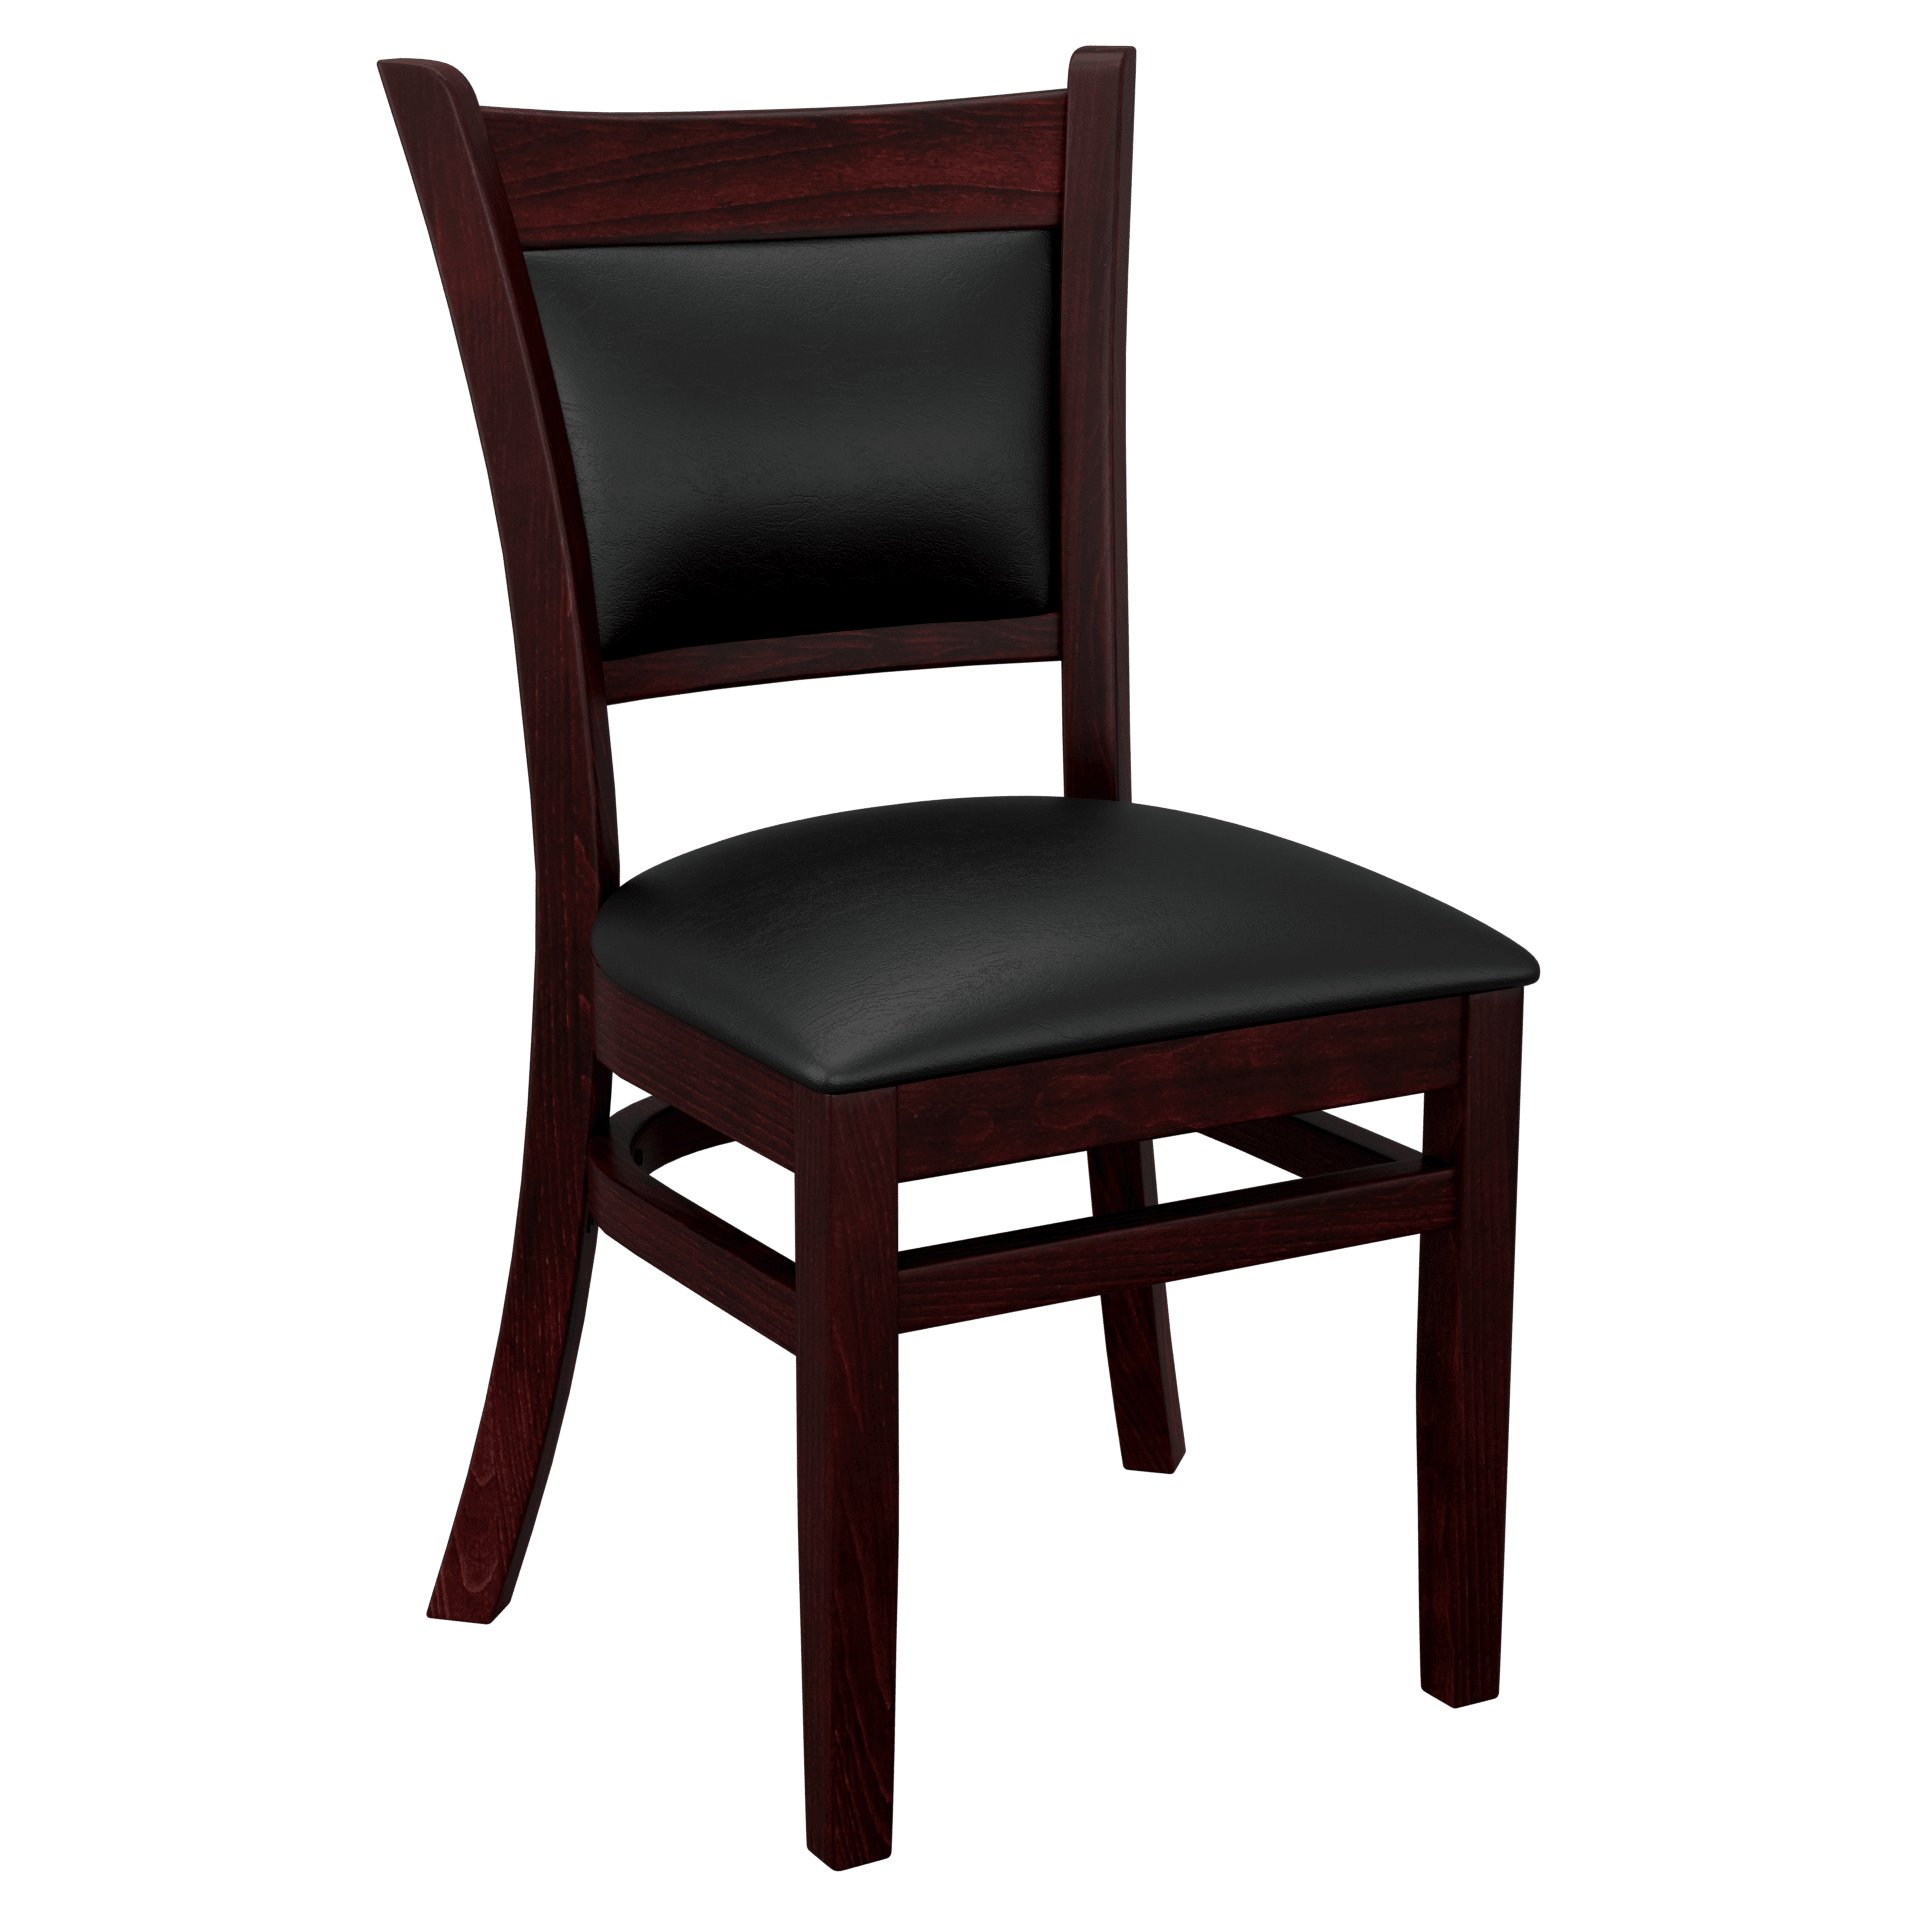 Premium Padded Back Wood Chair with Premium Padded Back Wood Chair